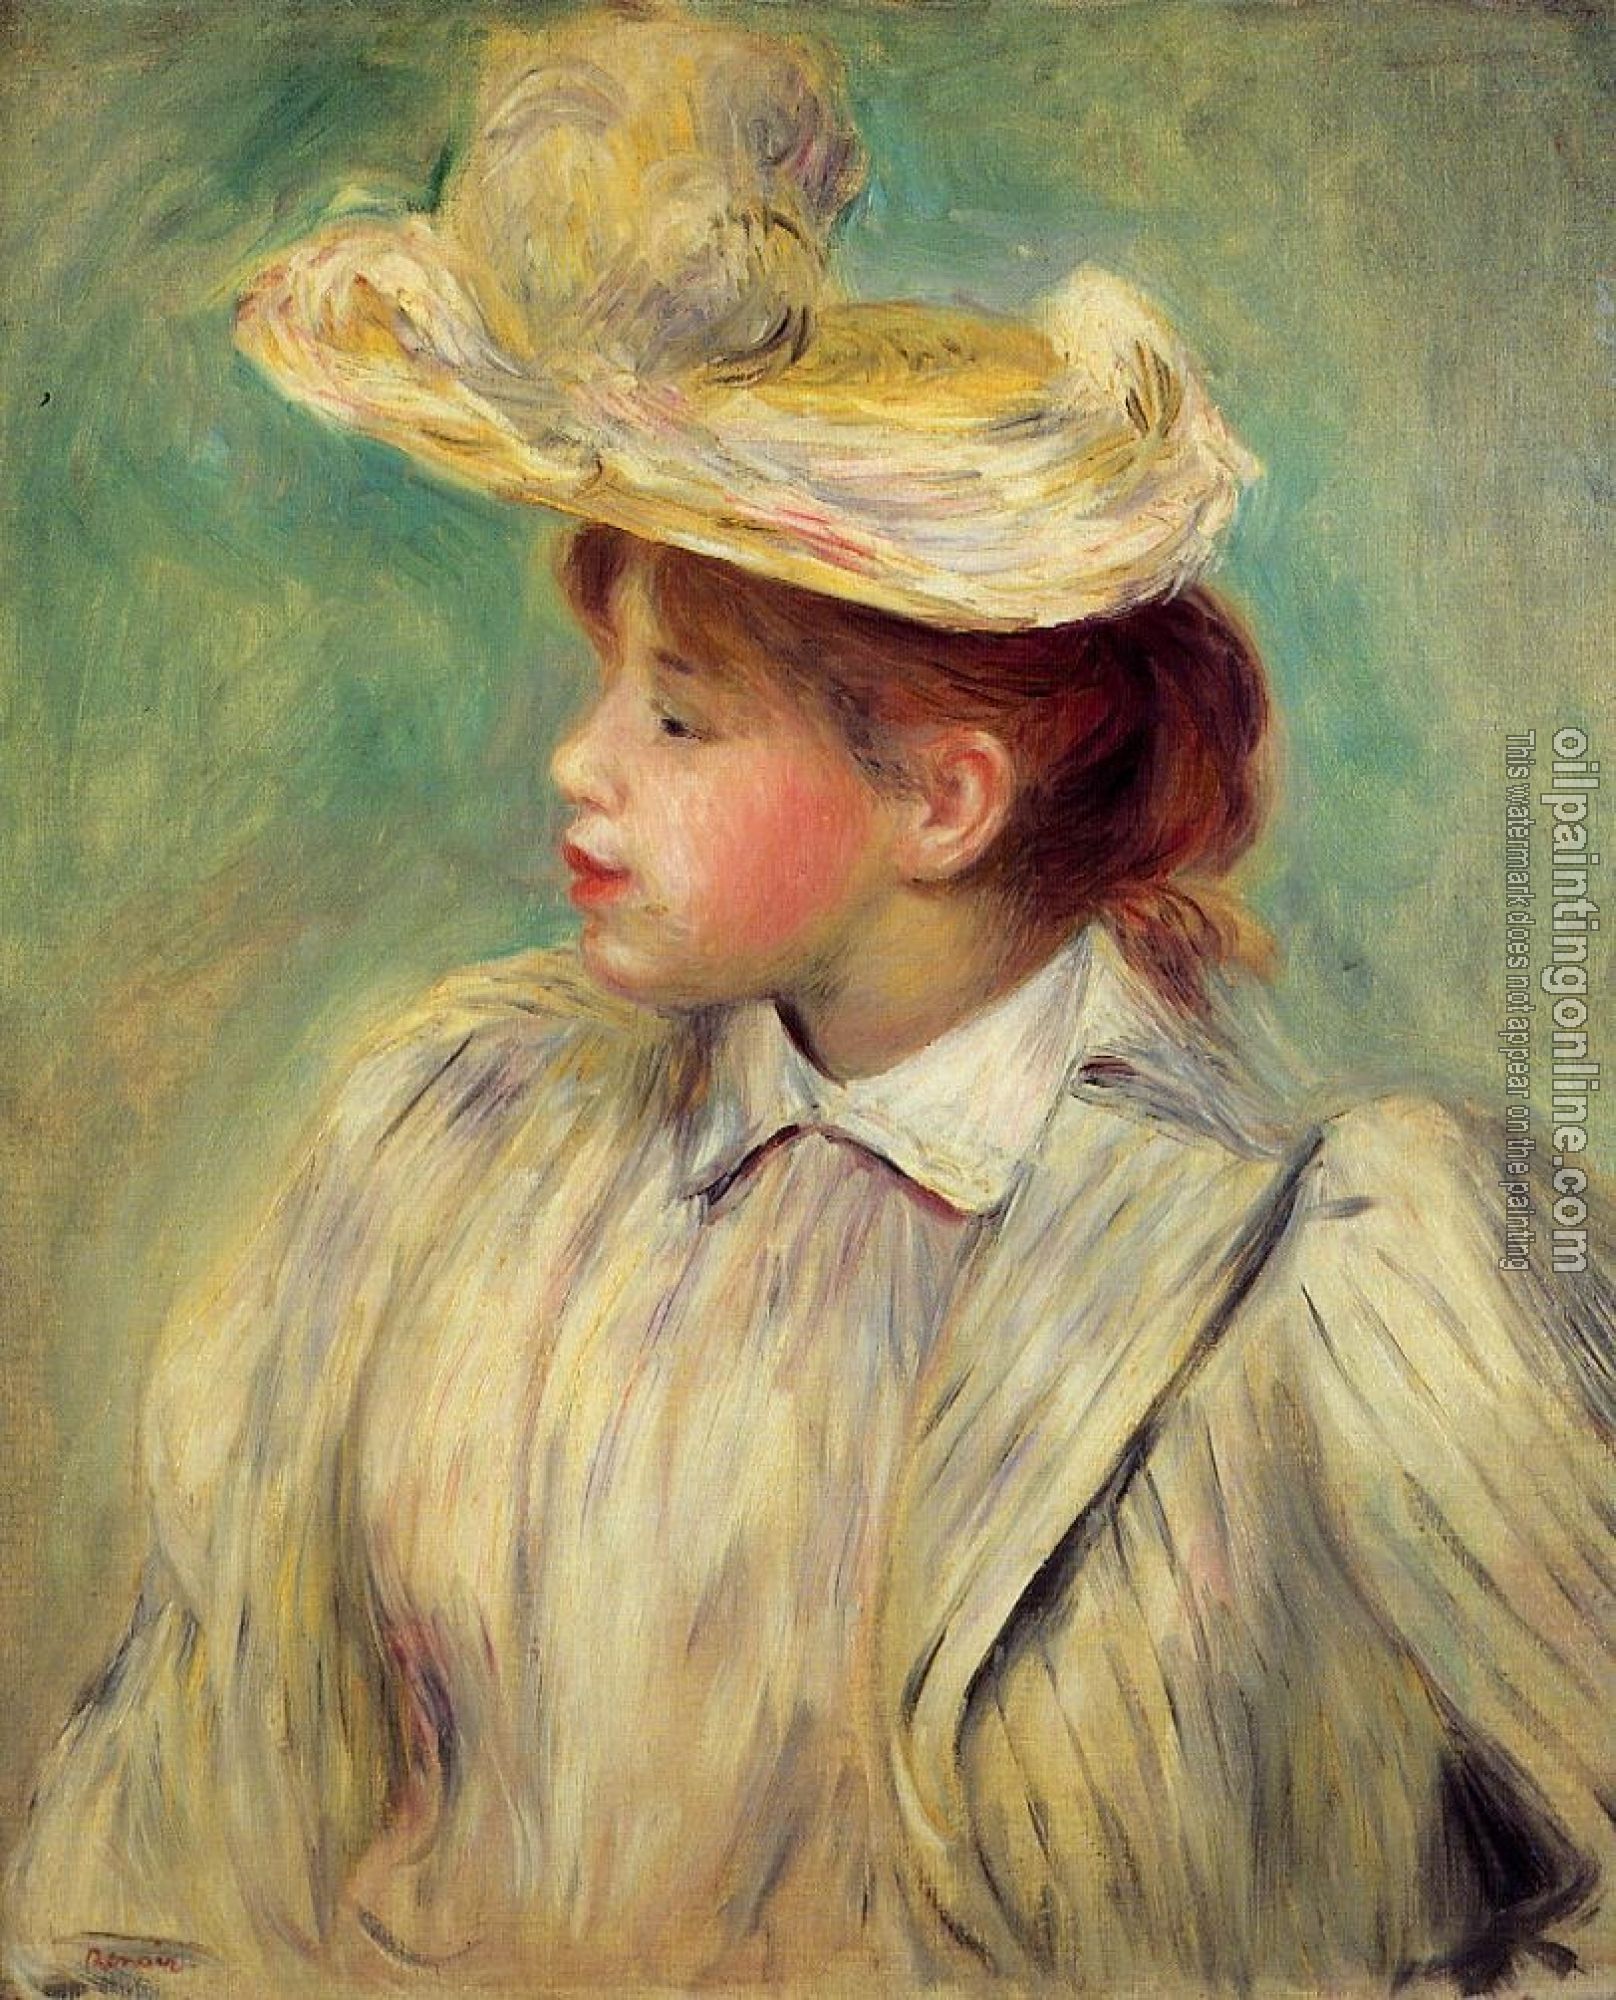 Renoir, Pierre Auguste - Young Woman in a Straw Hat